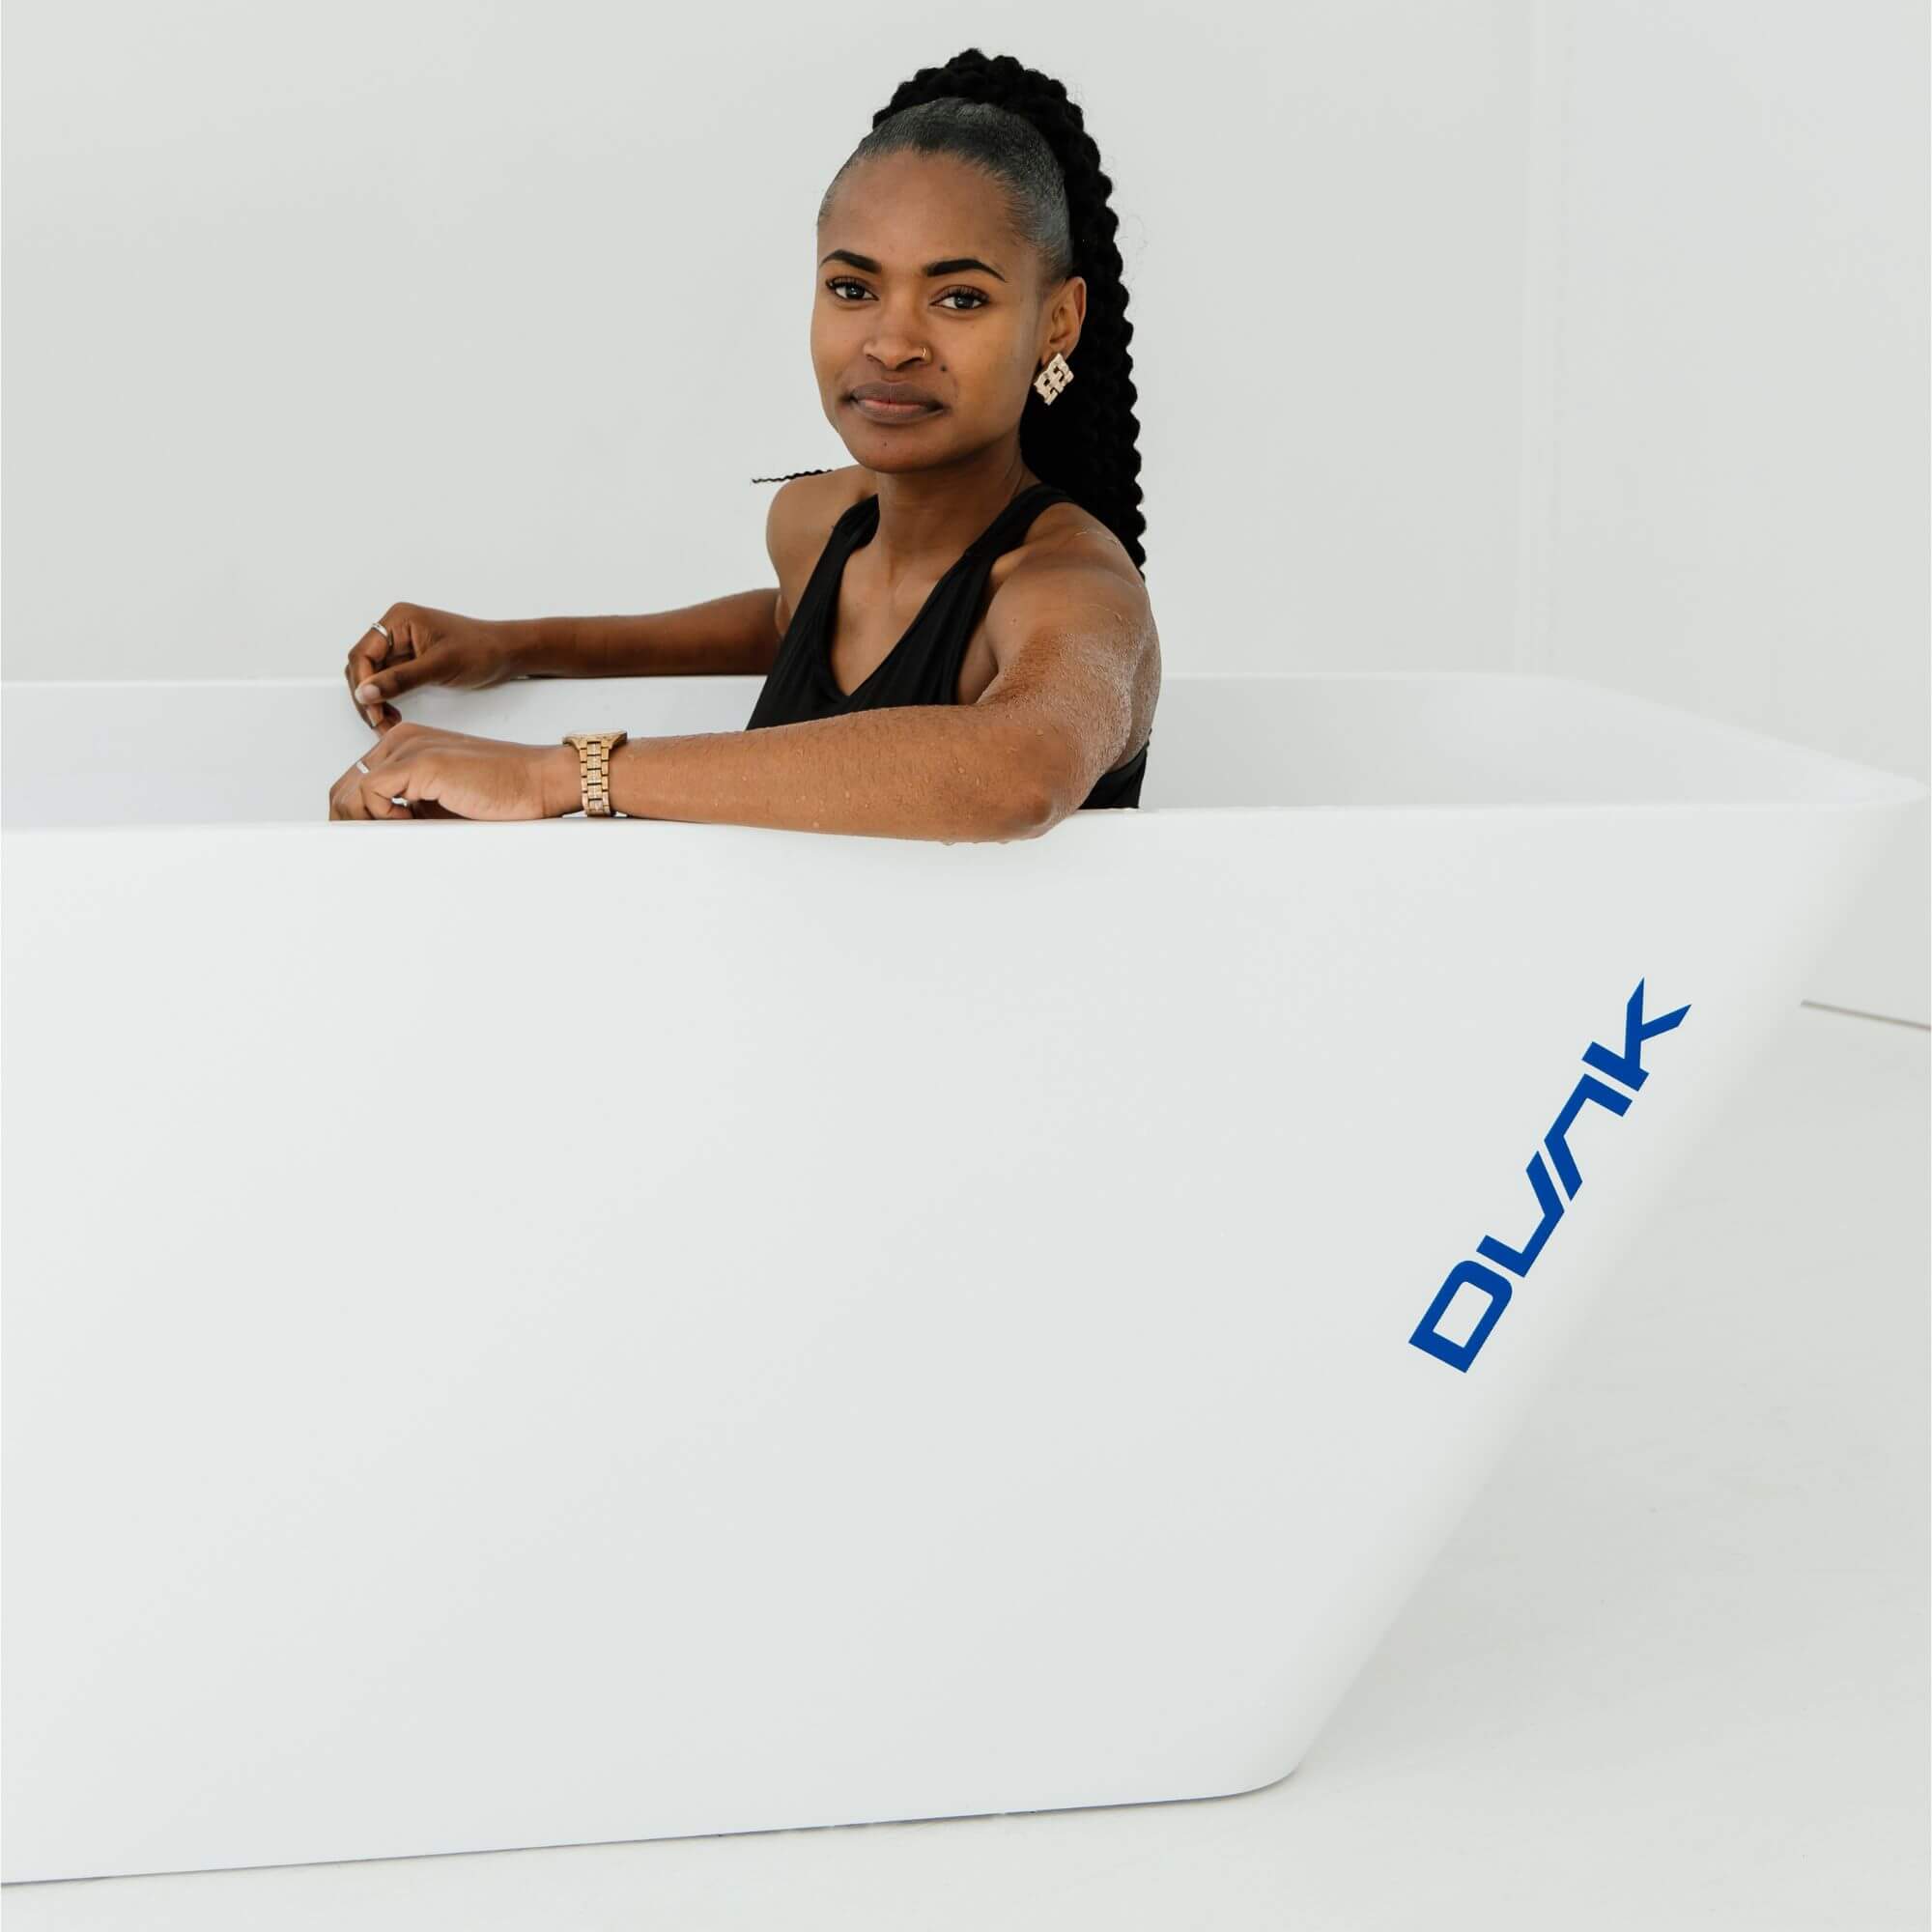 padelx dunk ice bath booking session